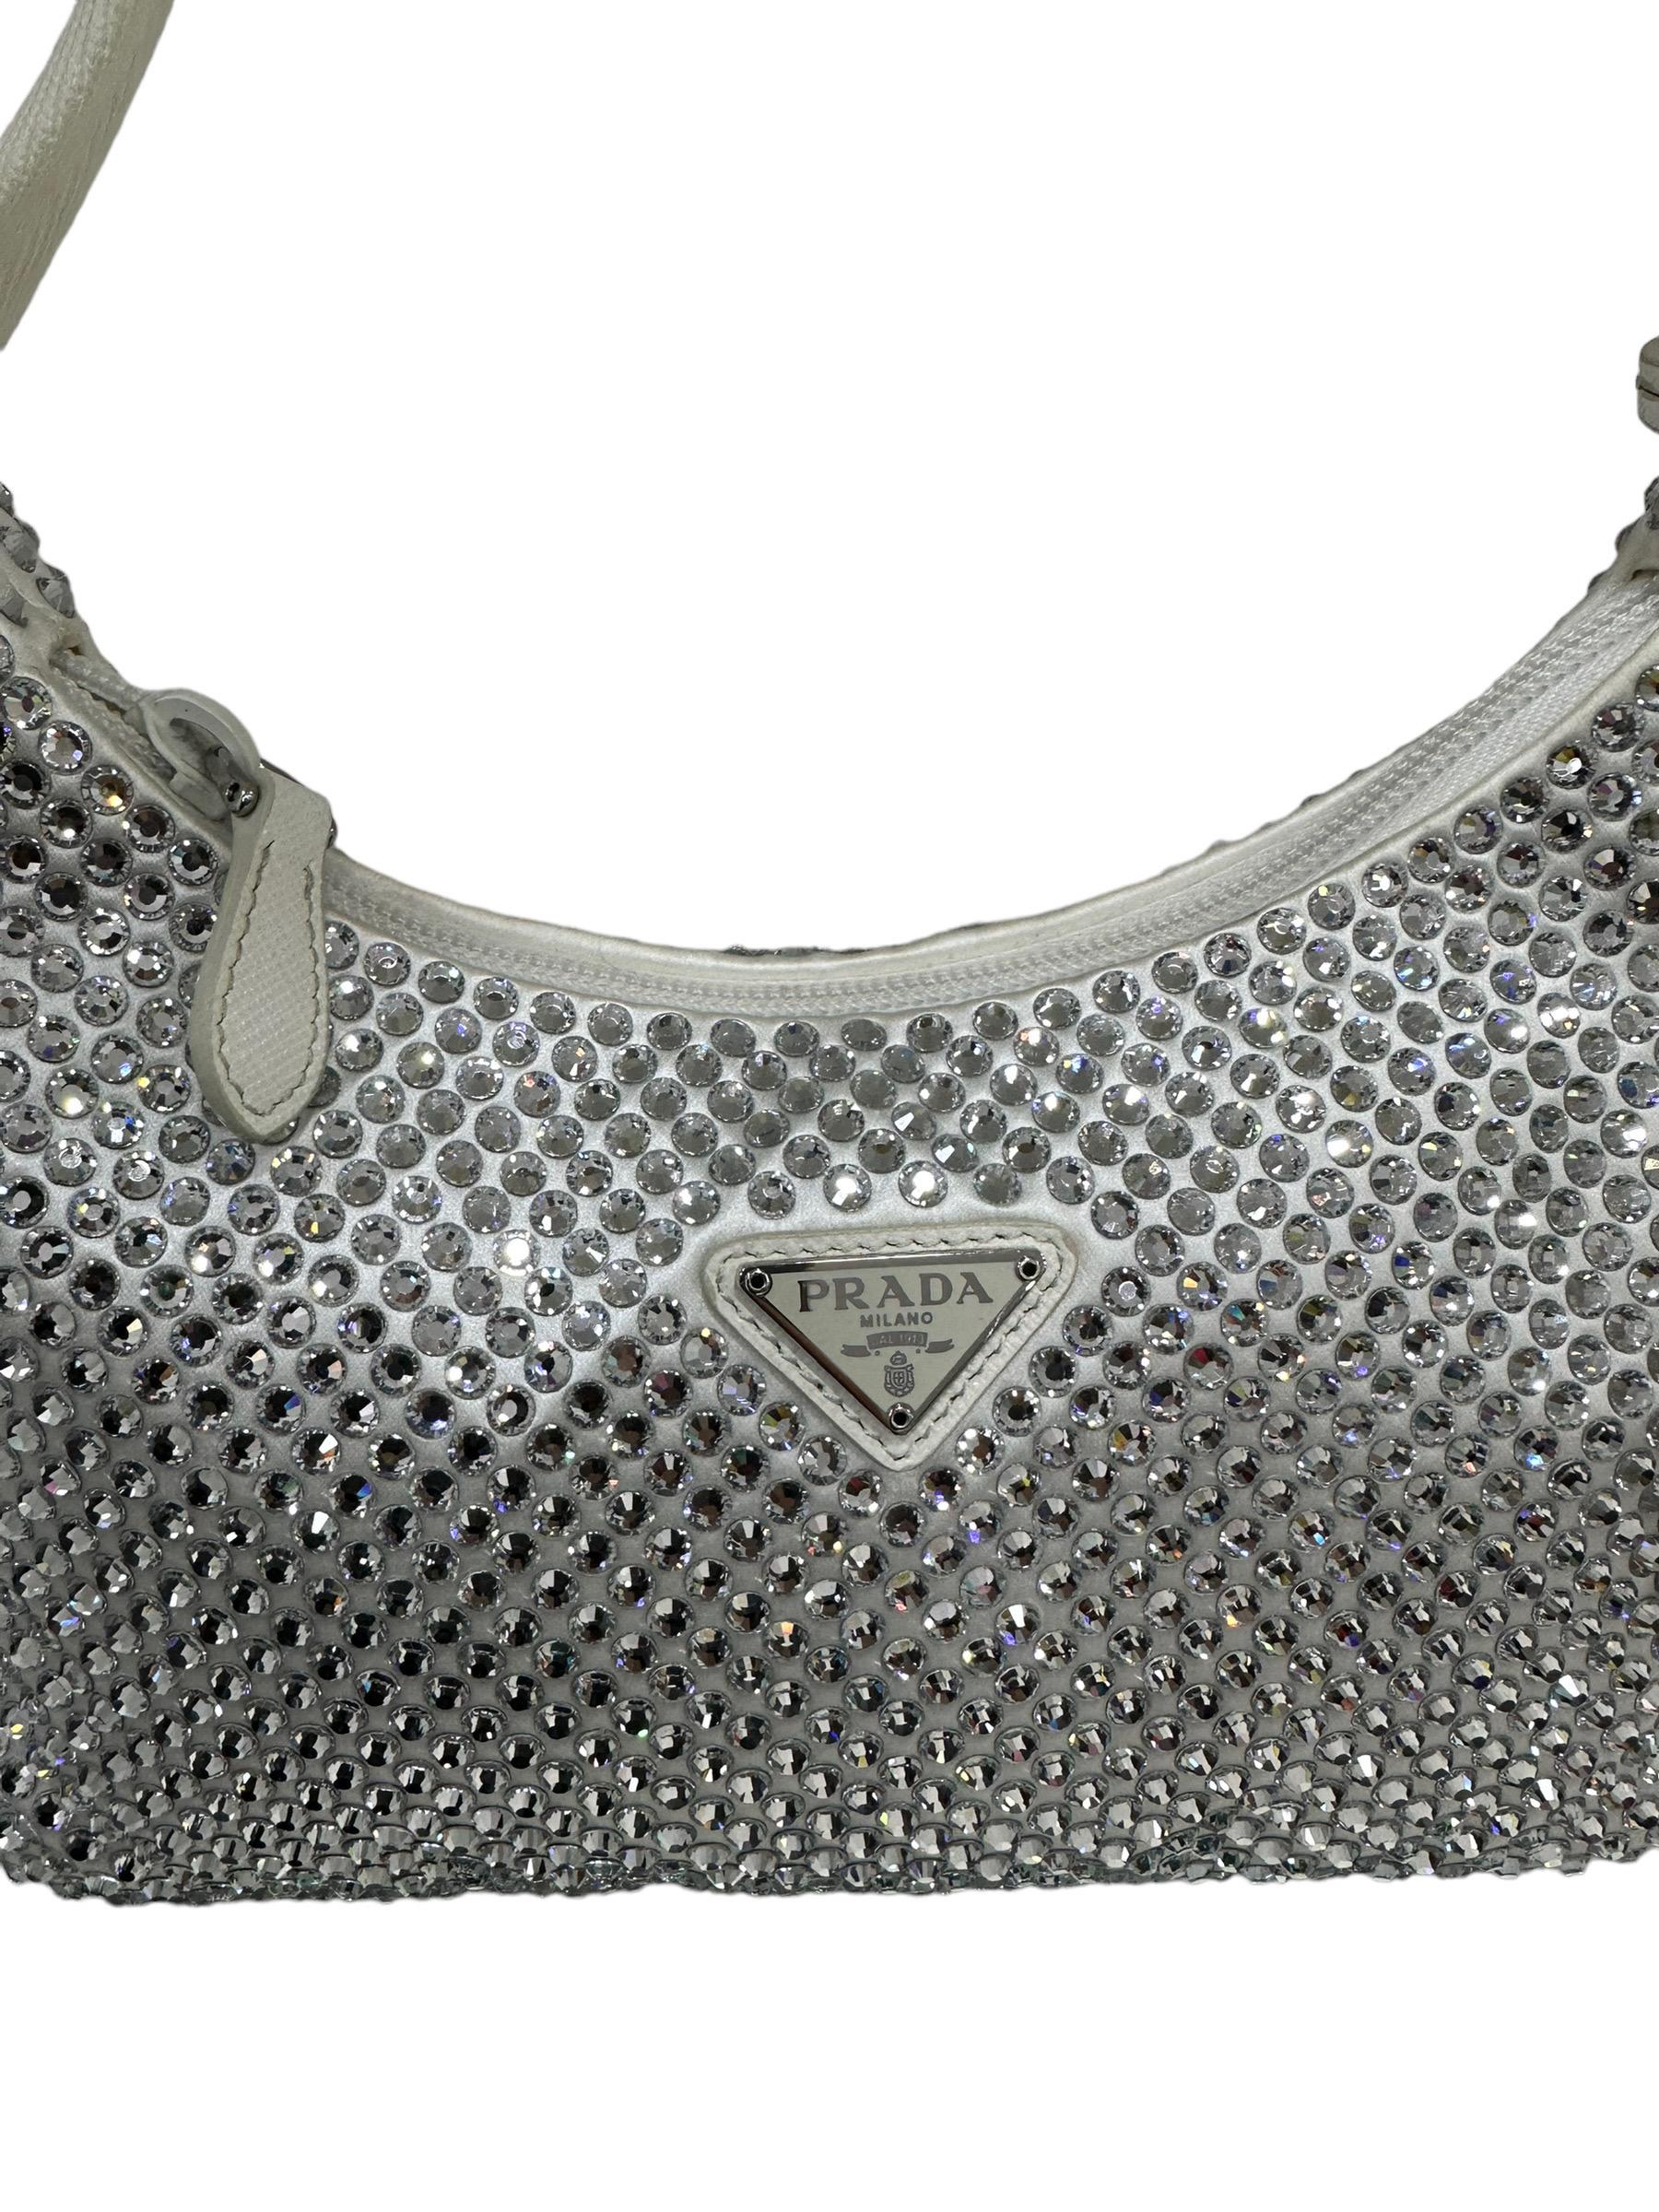 2000 Prada Re-Edition Crystal White Top Handle Bag In Good Condition In Torre Del Greco, IT